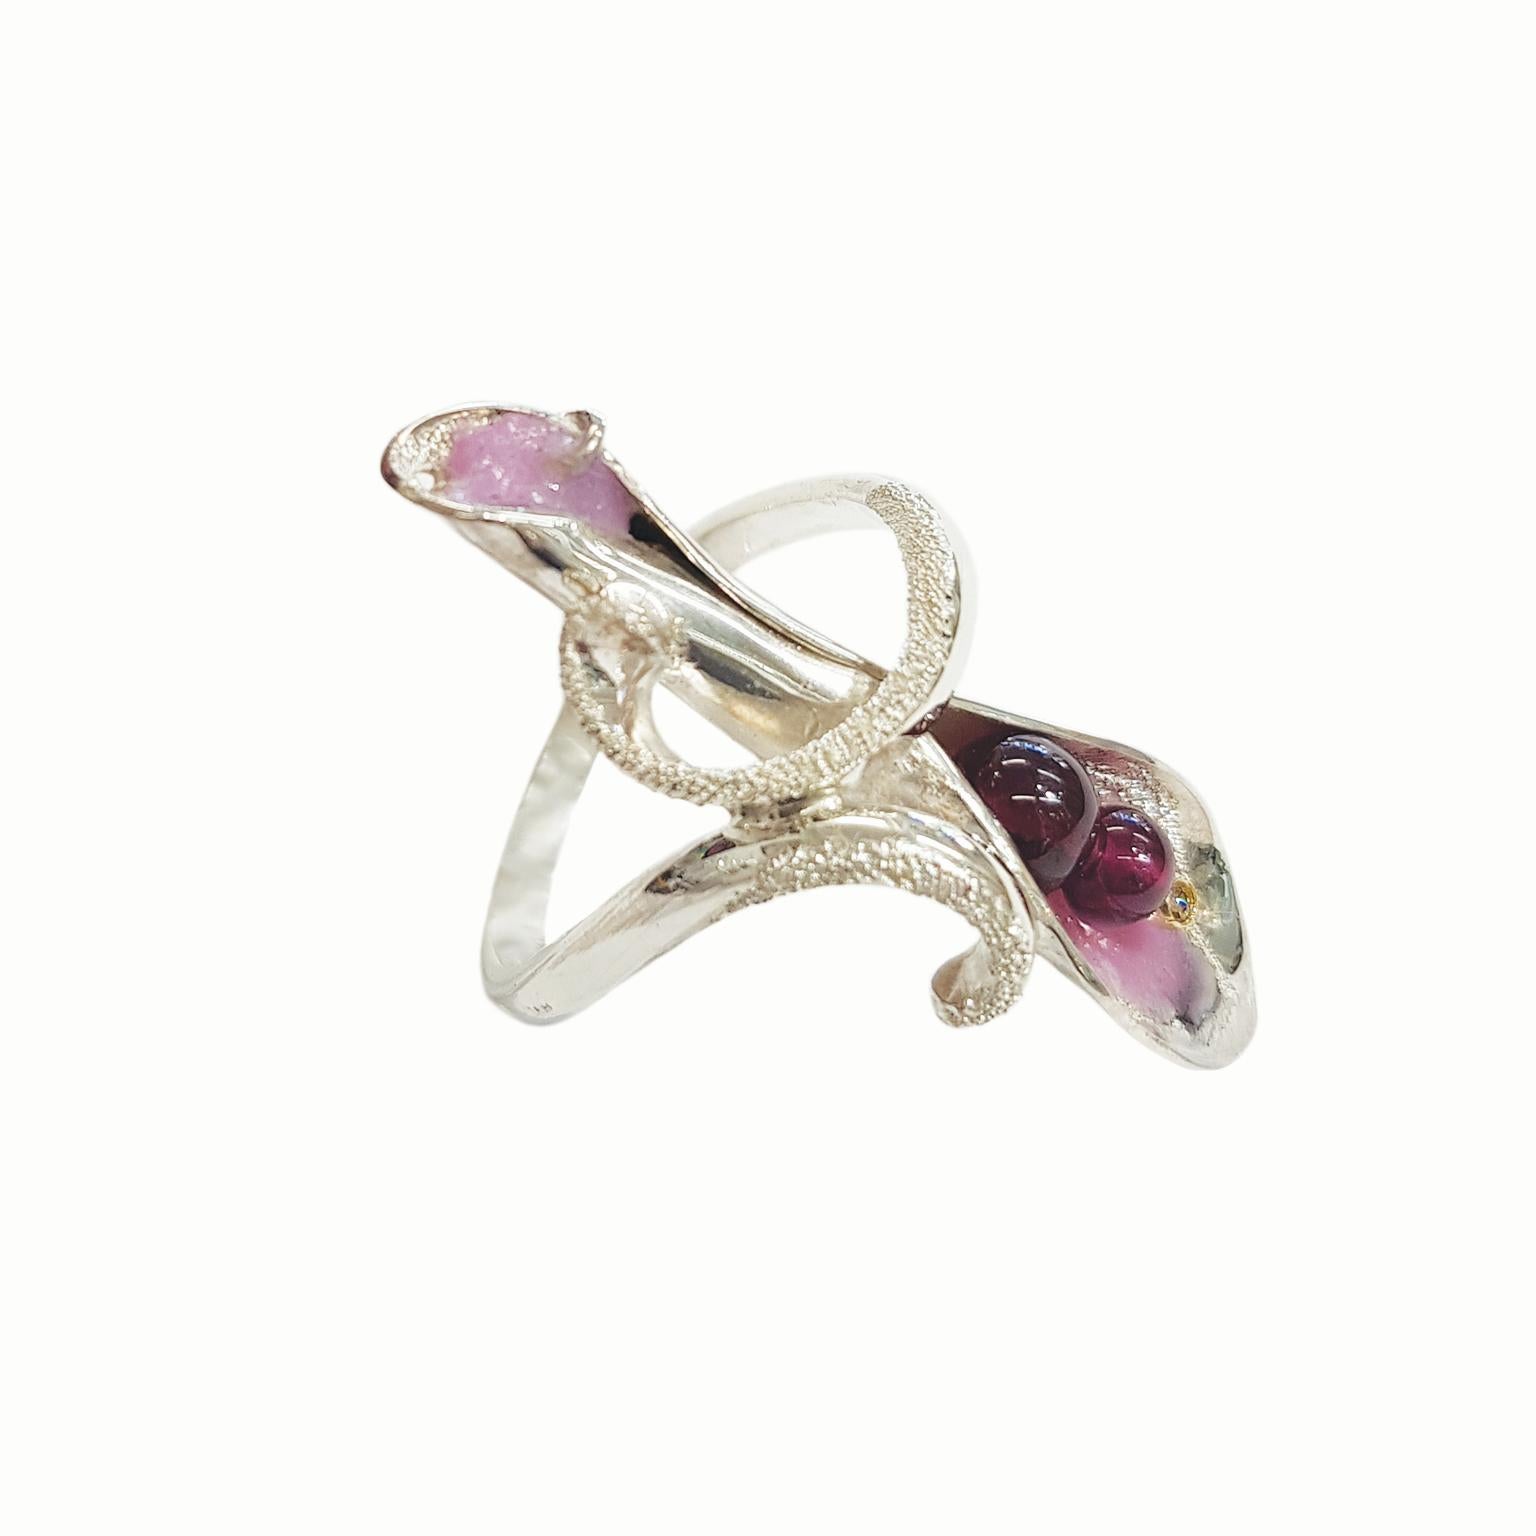 Experience the enchanting beauty of Paul Amey’s “Lilly” Ring – a one-of-a-kind creation meticulously handcrafted and brought to life by the award-winning jeweller himself. Crafted from sterling silver, this unique ring showcases the harmonious